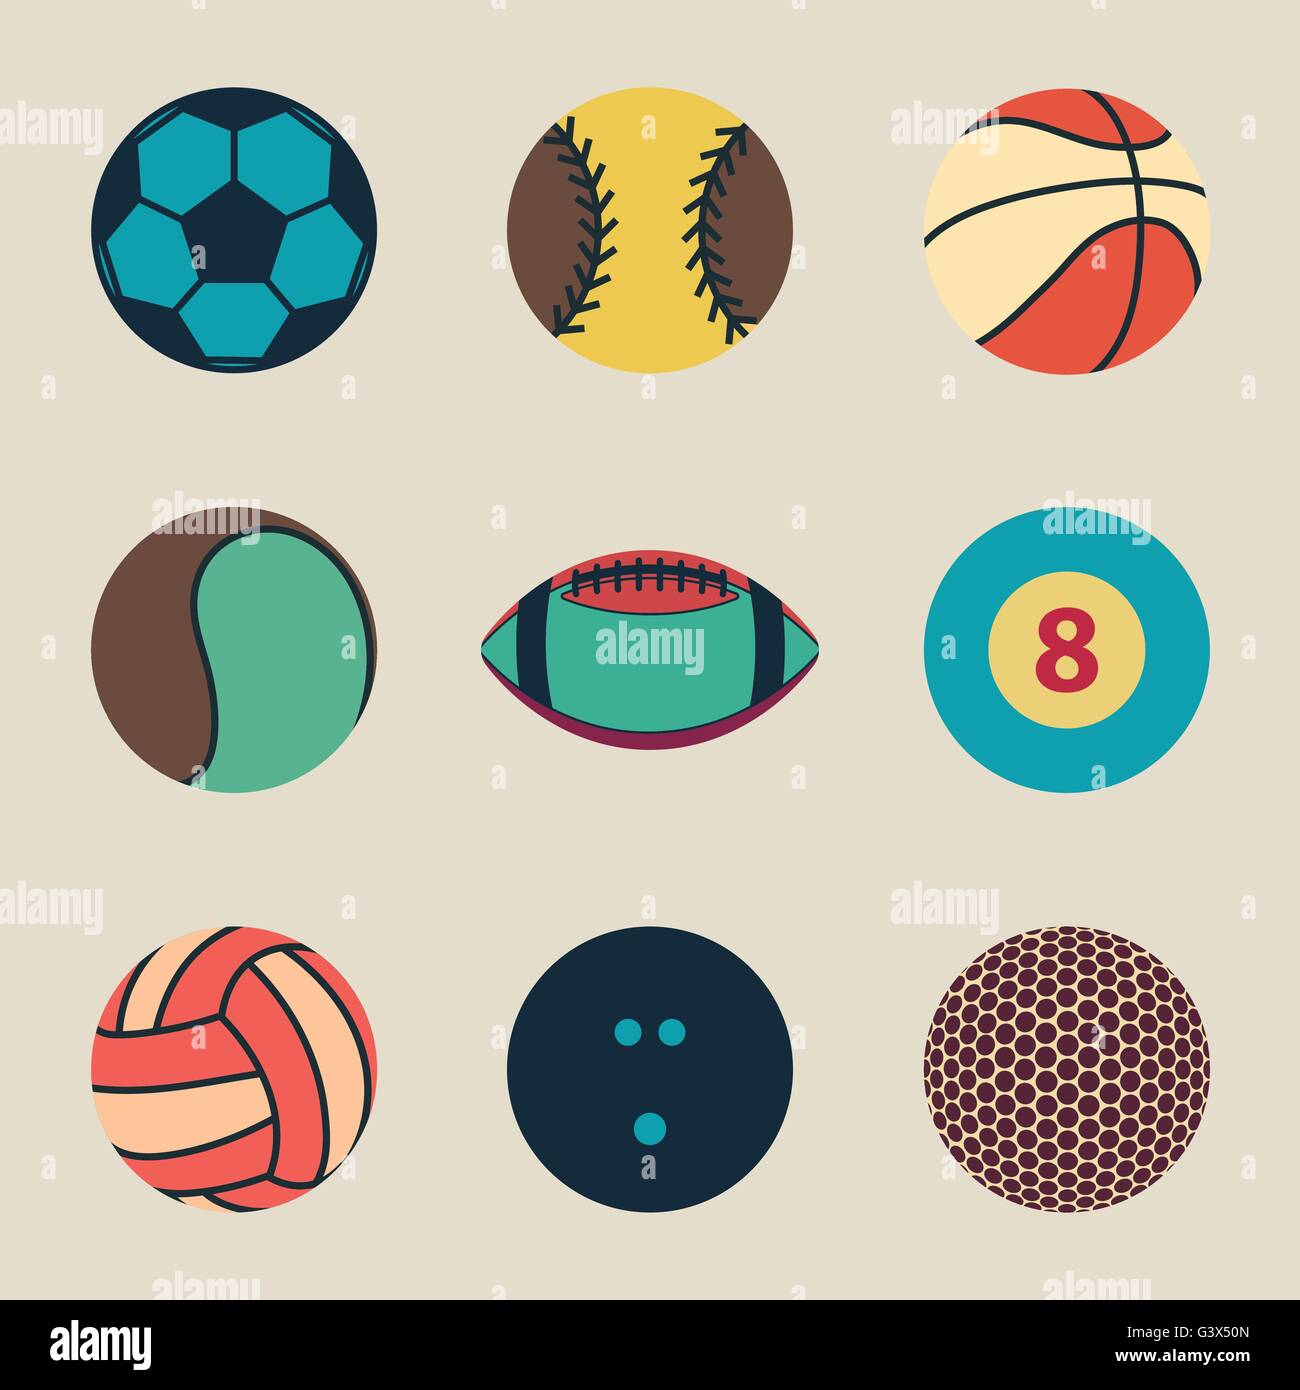 Collection of sport ball icon vintage vector illustration Stock Vector